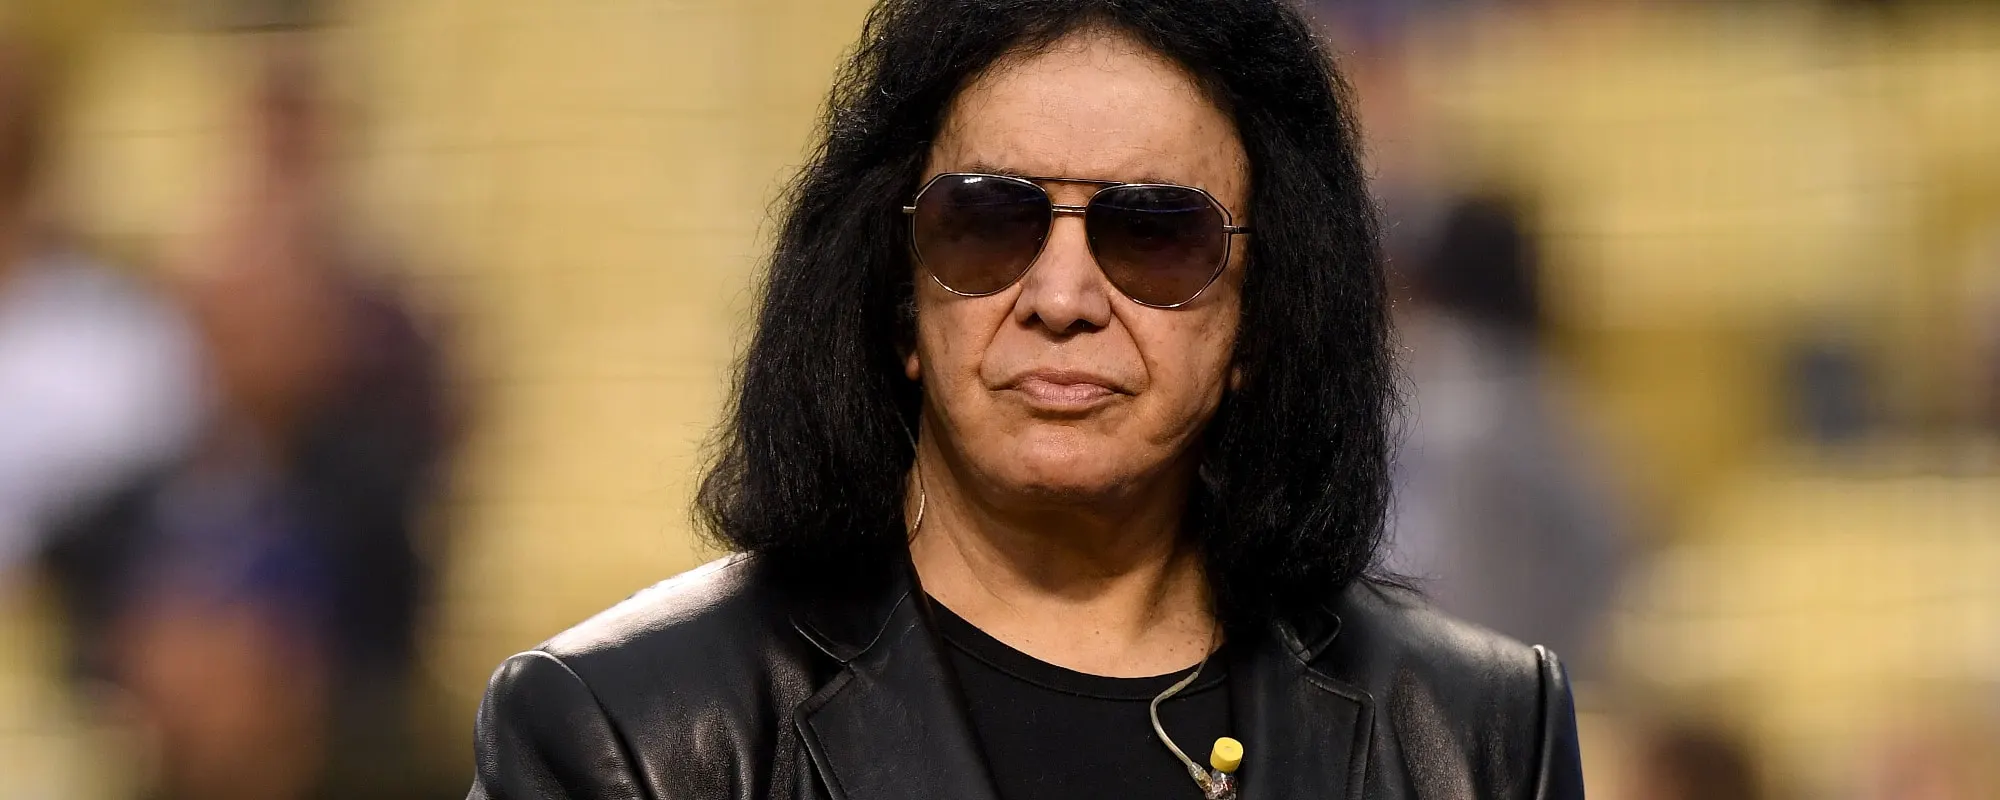 Kiss Postpones Tour Dates As Gene Simmons Tests Positive For COVID Days After Paul Stanley Does